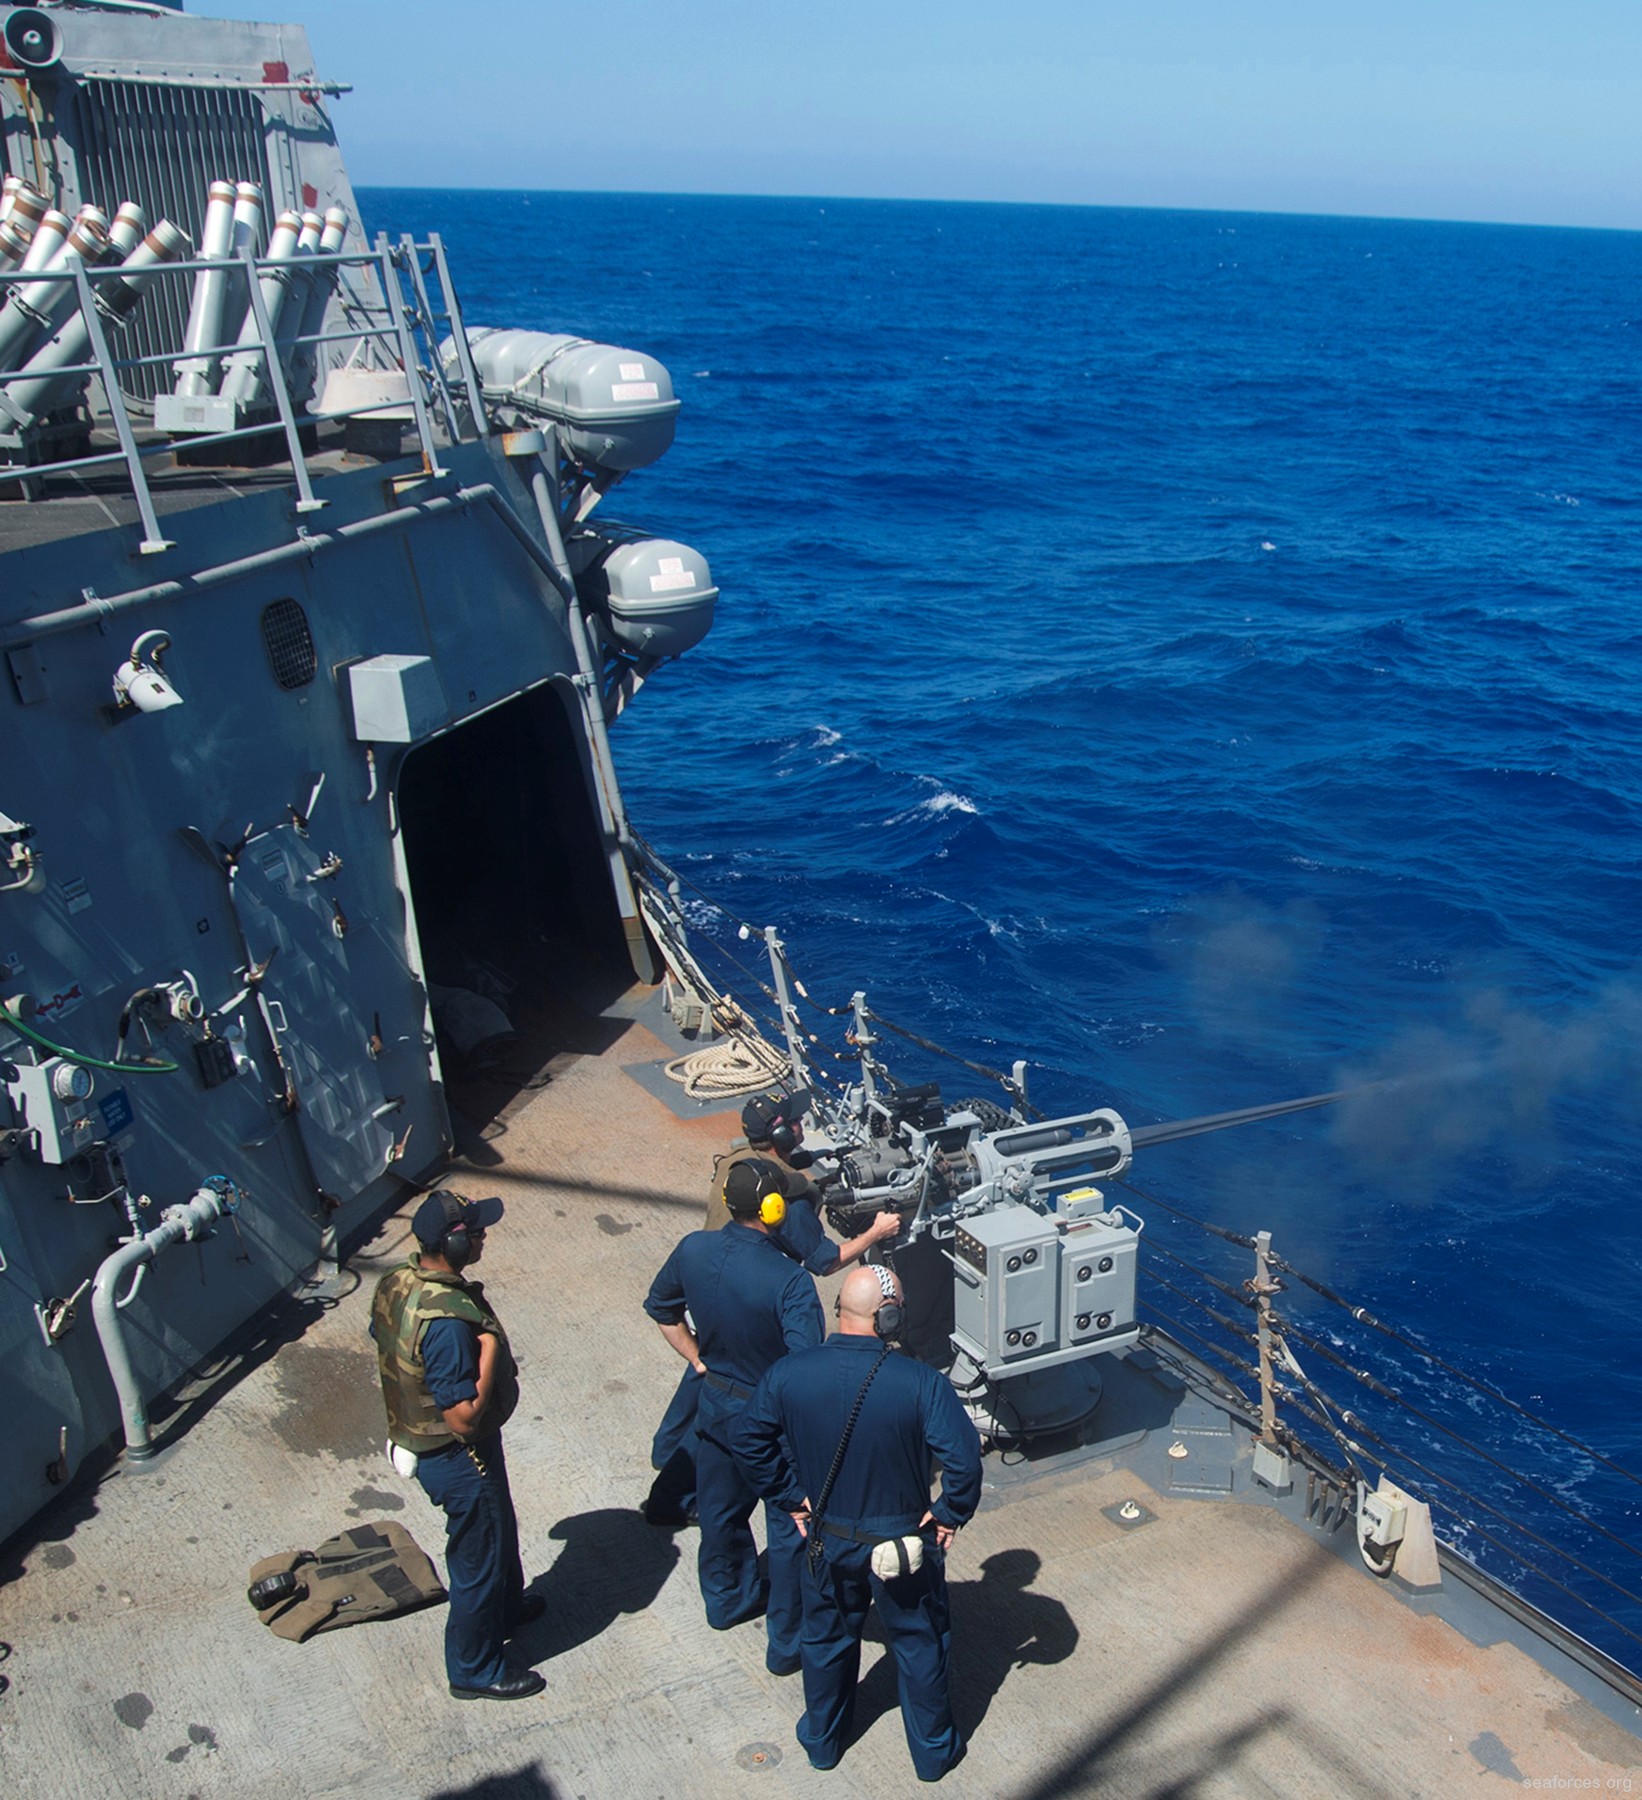 ddg-55 uss stout guided missile destroyer us navy 67 mk-38 mod.1 machine gun fire exercise